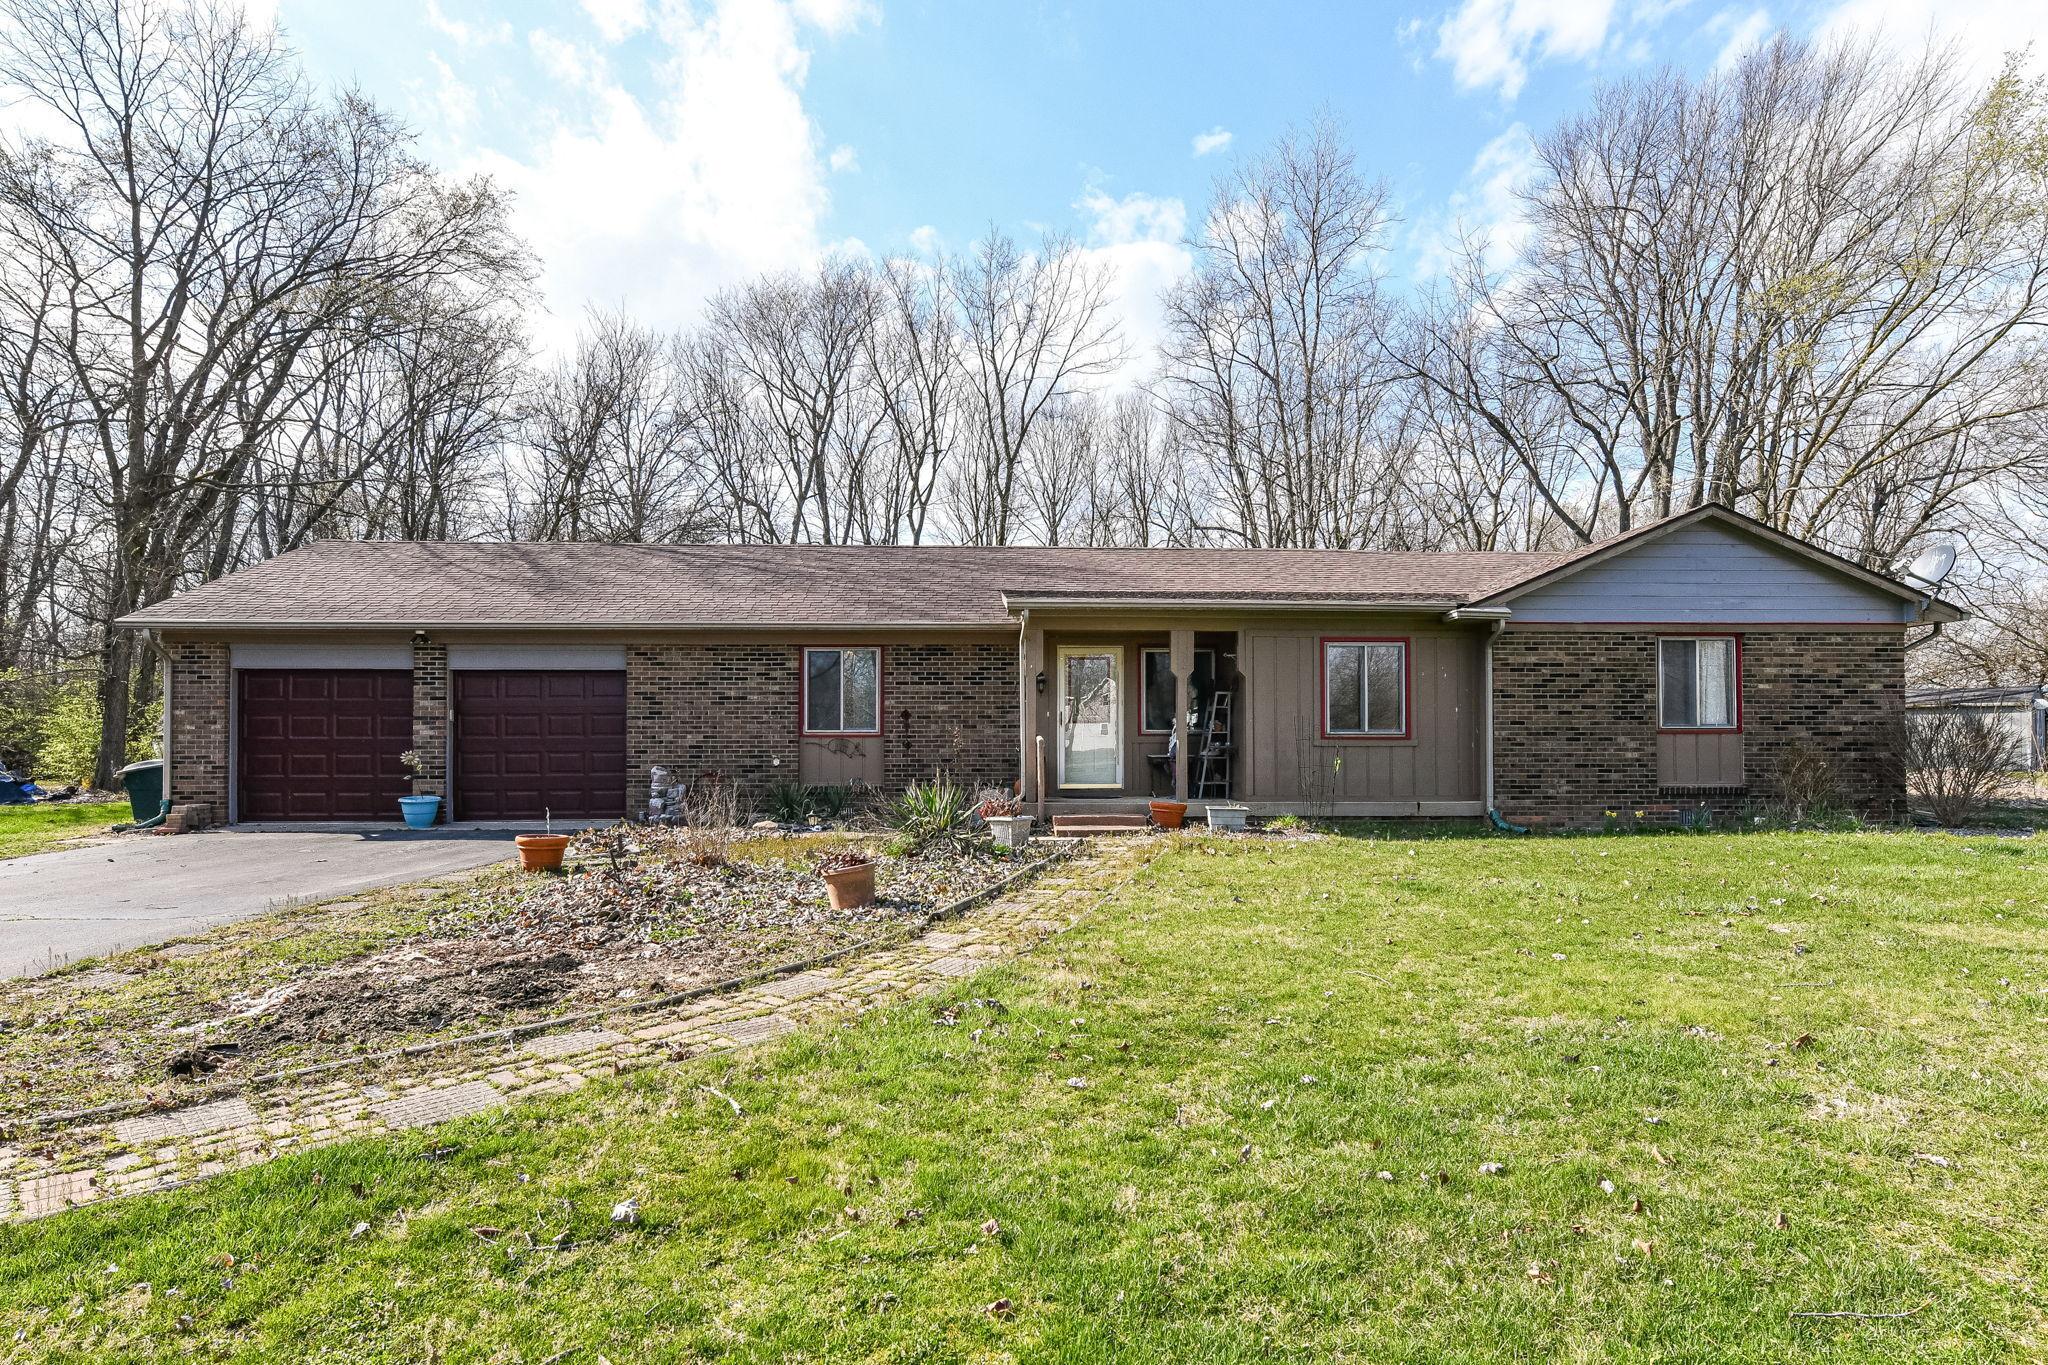 Photo one of 6034 Pleasant Valley Dr Anderson IN 46011 | MLS 21968645